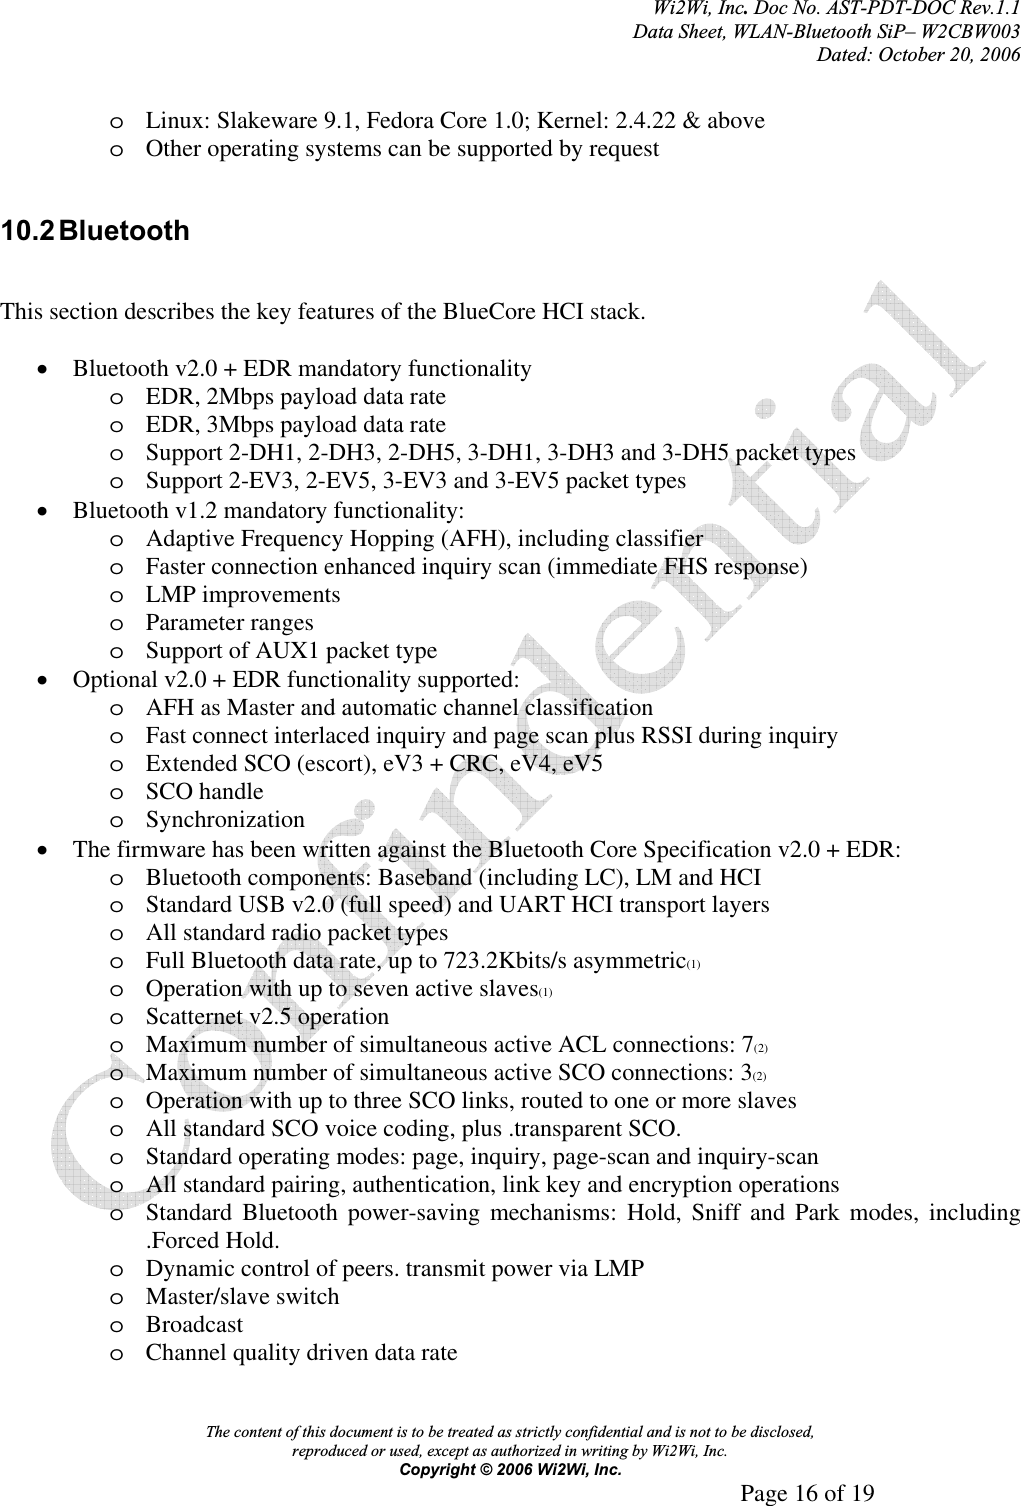 Wi2Wi, Inc.Doc No. AST-PDT-DOC Rev.1.1  Data Sheet, WLAN-Bluetooth SiP– W2CBW003 Dated: October 20, 2006 The content of this document is to be treated as strictly confidential and is not to be disclosed,  reproduced or used, except as authorized in writing by Wi2Wi, Inc.  Copyright © 2006 Wi2Wi, Inc.     Page 16 of 19   oLinux: Slakeware 9.1, Fedora Core 1.0; Kernel: 2.4.22 &amp; above oOther operating systems can be supported by request 10.2 Bluetooth This section describes the key features of the BlueCore HCI stack. xBluetooth v2.0 + EDR mandatory functionality oEDR, 2Mbps payload data rate oEDR, 3Mbps payload data rate oSupport 2-DH1, 2-DH3, 2-DH5, 3-DH1, 3-DH3 and 3-DH5 packet types oSupport 2-EV3, 2-EV5, 3-EV3 and 3-EV5 packet types xBluetooth v1.2 mandatory functionality: oAdaptive Frequency Hopping (AFH), including classifier oFaster connection enhanced inquiry scan (immediate FHS response) oLMP improvements oParameter ranges oSupport of AUX1 packet type xOptional v2.0 + EDR functionality supported: oAFH as Master and automatic channel classification oFast connect interlaced inquiry and page scan plus RSSI during inquiry oExtended SCO (escort), eV3 + CRC, eV4, eV5 oSCO handle oSynchronizationxThe firmware has been written against the Bluetooth Core Specification v2.0 + EDR: oBluetooth components: Baseband (including LC), LM and HCI oStandard USB v2.0 (full speed) and UART HCI transport layers oAll standard radio packet types oFull Bluetooth data rate, up to 723.2Kbits/s asymmetric(1)oOperation with up to seven active slaves(1)oScatternet v2.5 operation oMaximum number of simultaneous active ACL connections: 7(2)oMaximum number of simultaneous active SCO connections: 3(2)oOperation with up to three SCO links, routed to one or more slaves oAll standard SCO voice coding, plus .transparent SCO. oStandard operating modes: page, inquiry, page-scan and inquiry-scan oAll standard pairing, authentication, link key and encryption operations oStandard Bluetooth power-saving mechanisms: Hold, Sniff and Park modes, including .Forced Hold. oDynamic control of peers. transmit power via LMP oMaster/slave switch oBroadcastoChannel quality driven data rate 